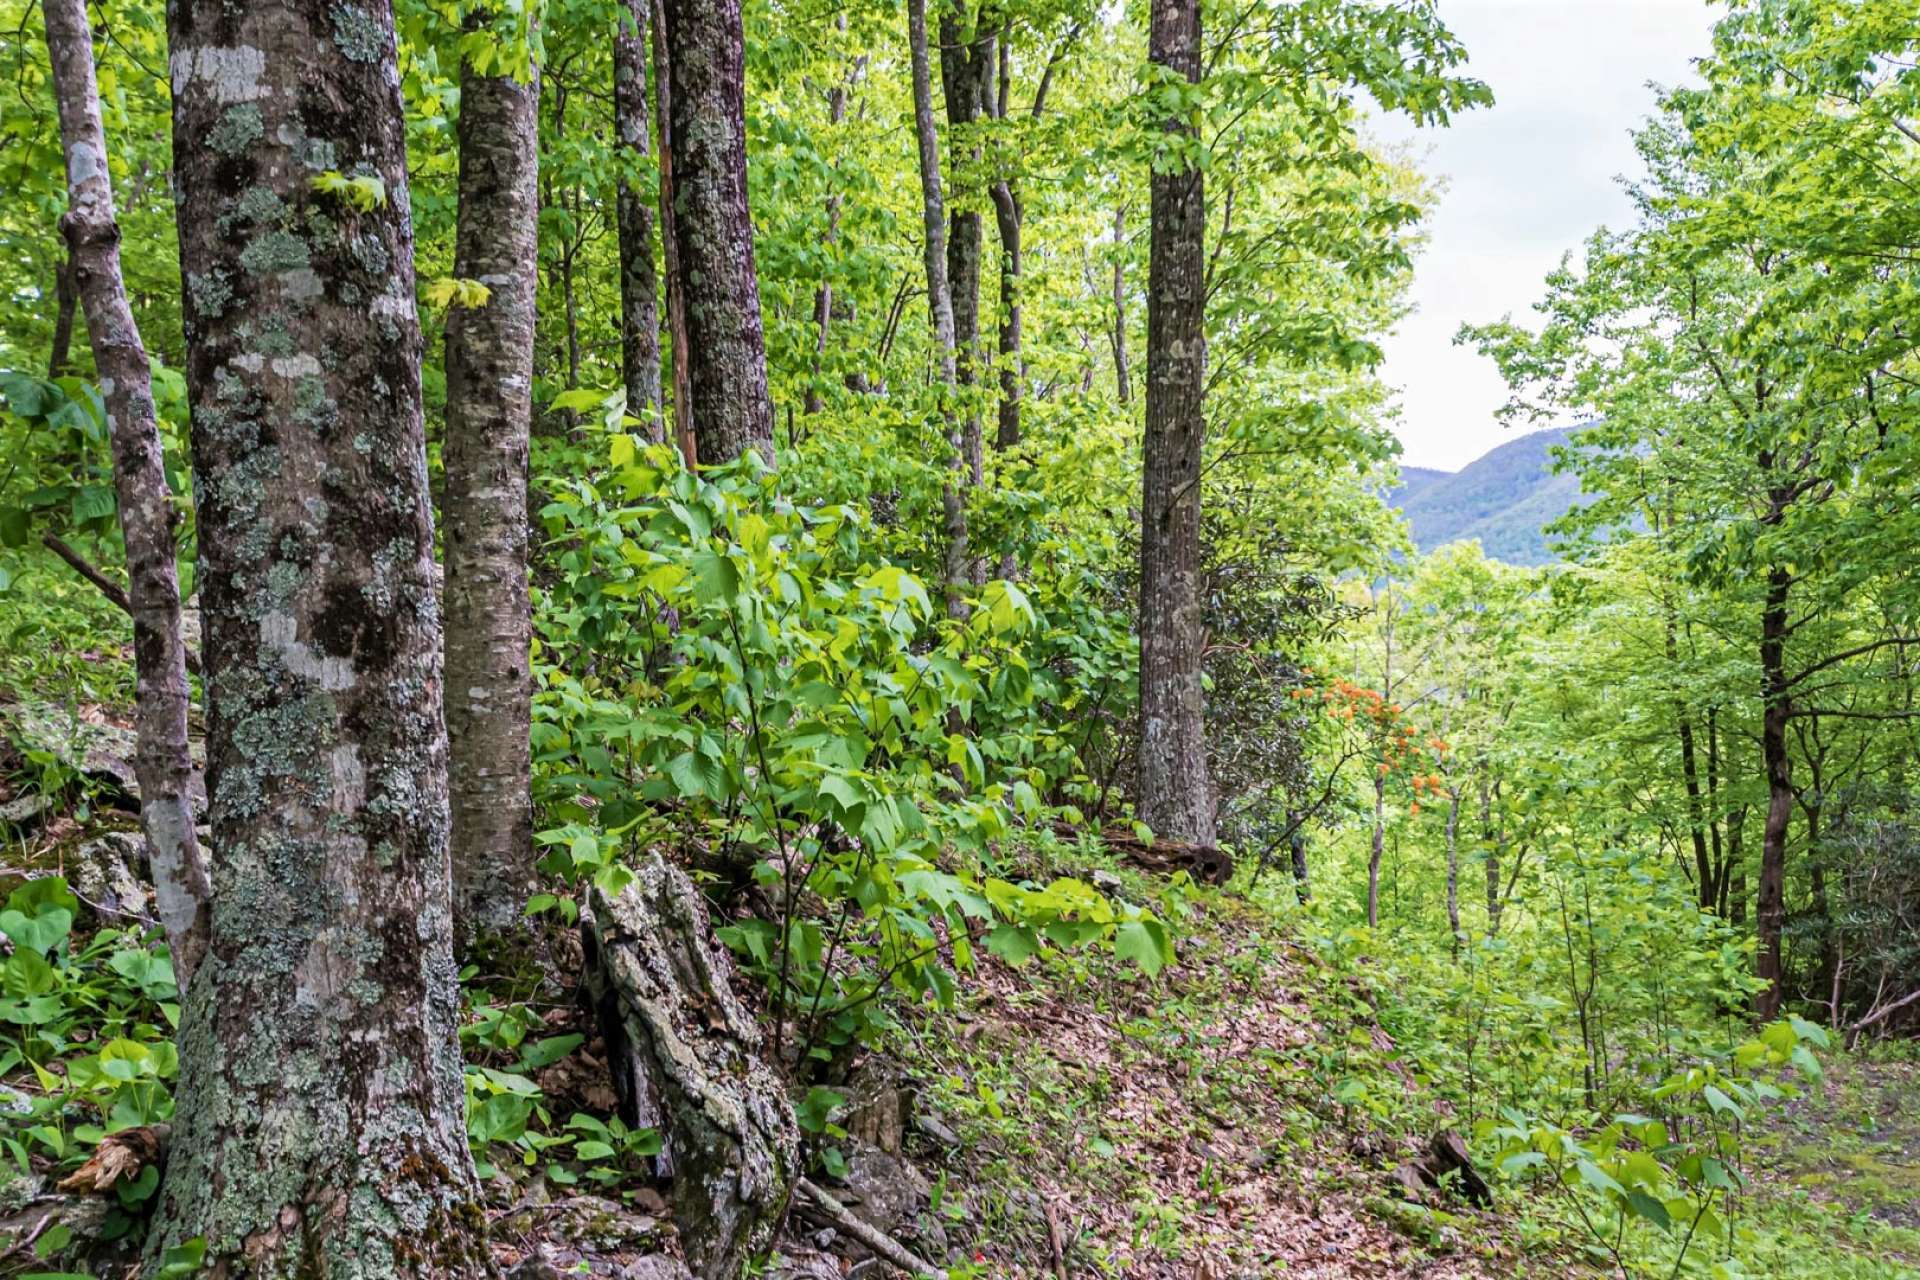 Shhhhhhh……you might catch a glimpse of a whitetail deer, wild turkey, or other woodland inhabitants. There are several potential home sites to chose from.